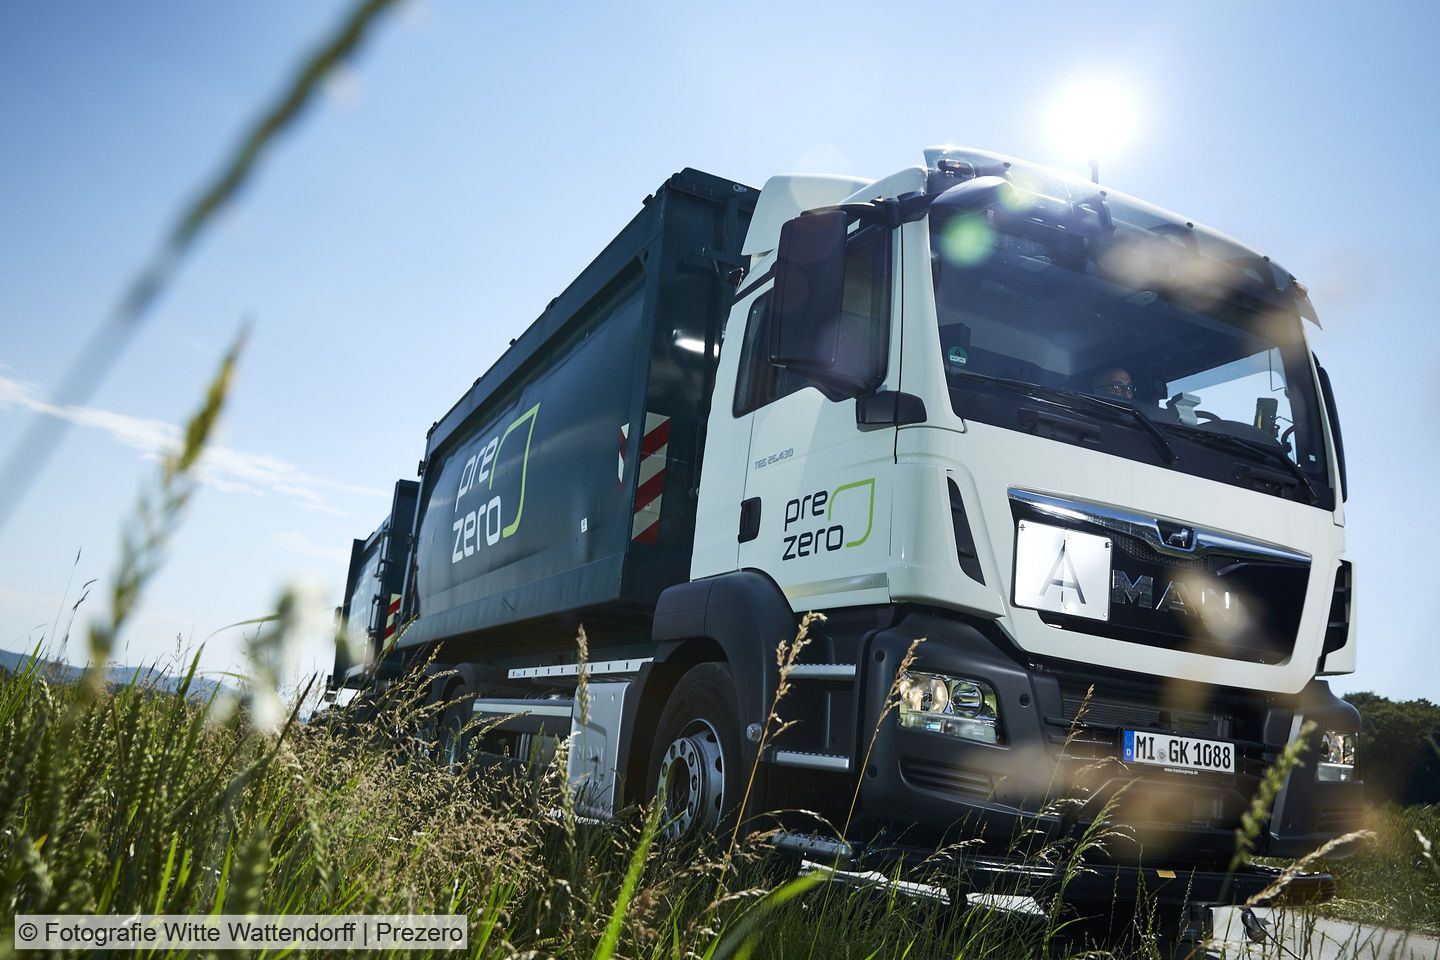 Prezero buys Ferrovial's waste activities in Spain and Portugal 